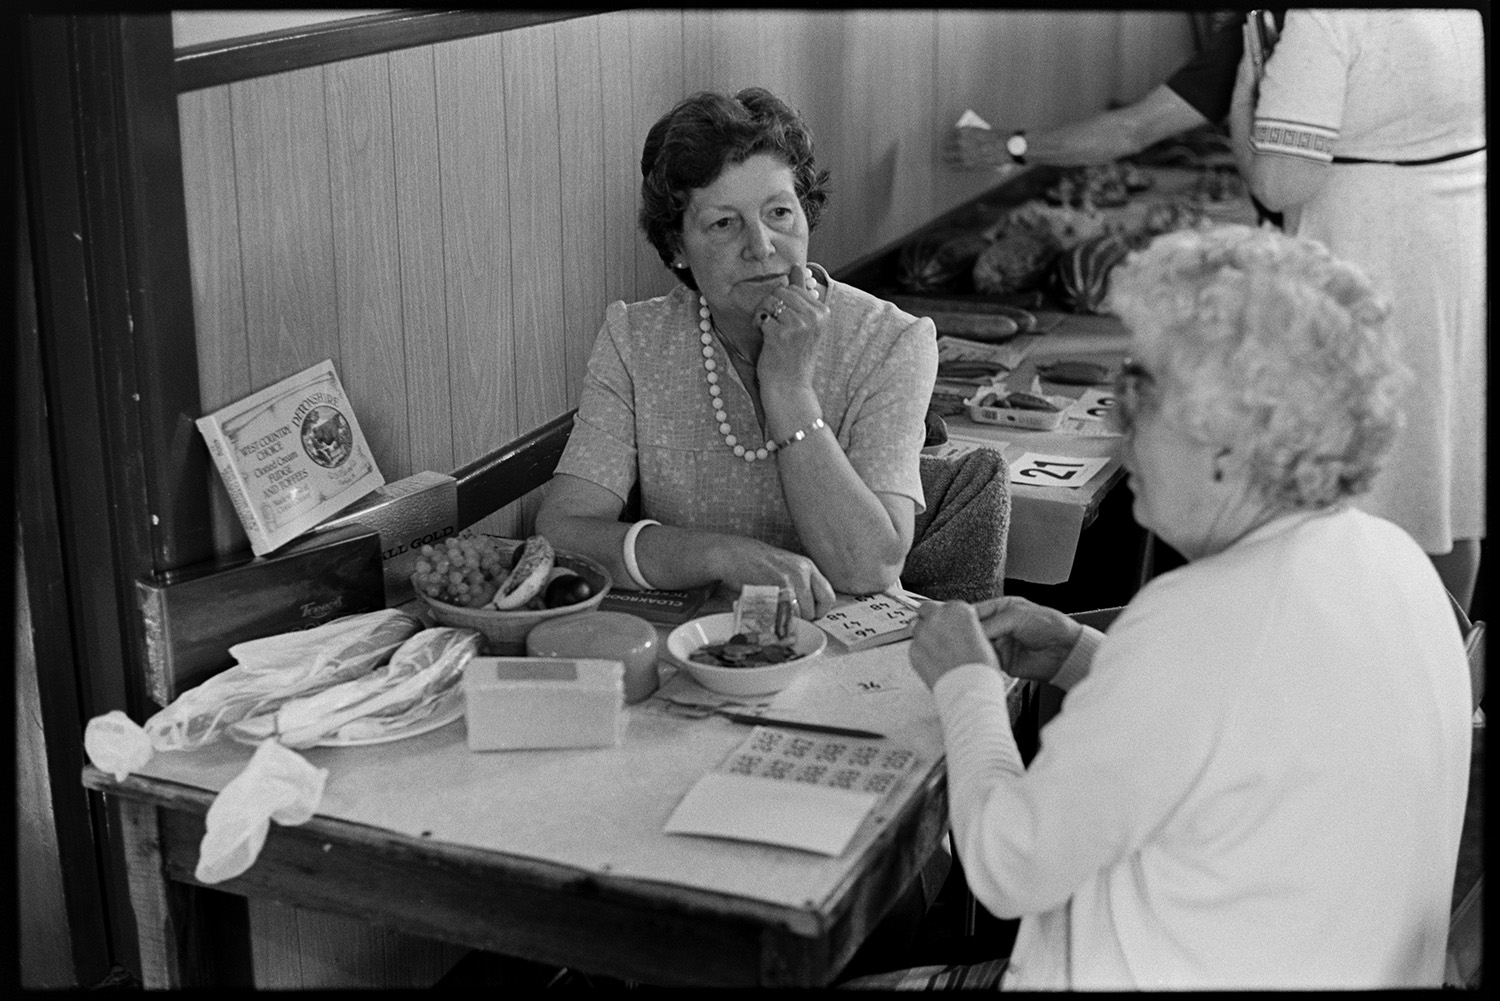 Flower show, people looking at exhibits, women looking at cake, paintings on display.
[Two ladies selling draw tickets at a table at the Dolton Flower Show in Dolton Village Hall. A table with exhibits can be seen behind them.]